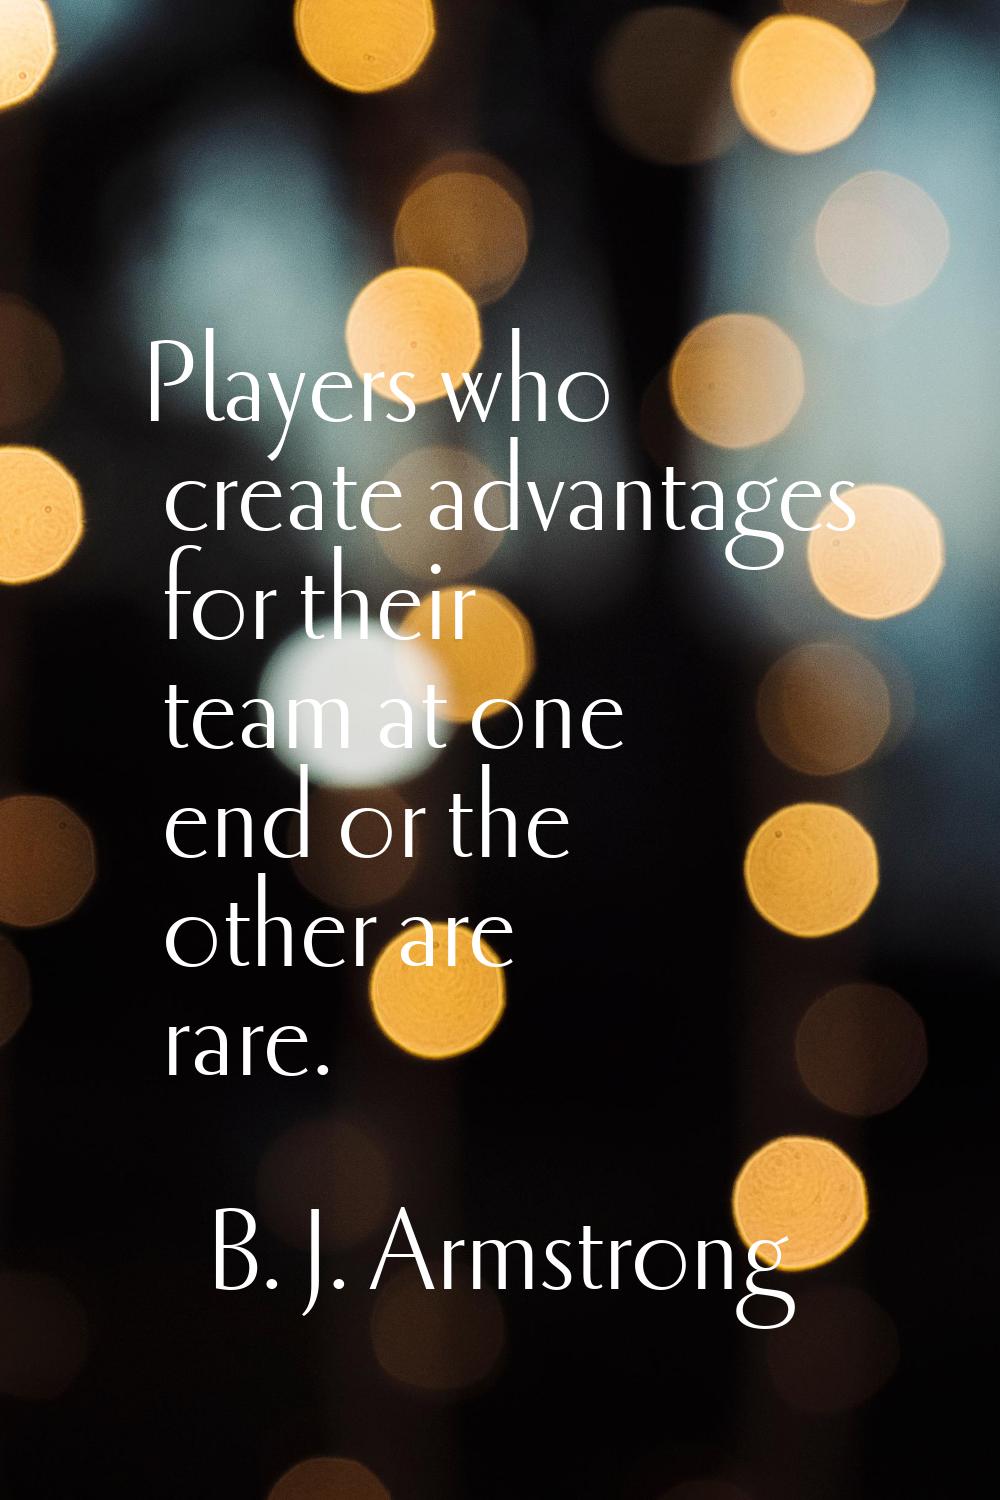 Players who create advantages for their team at one end or the other are rare.